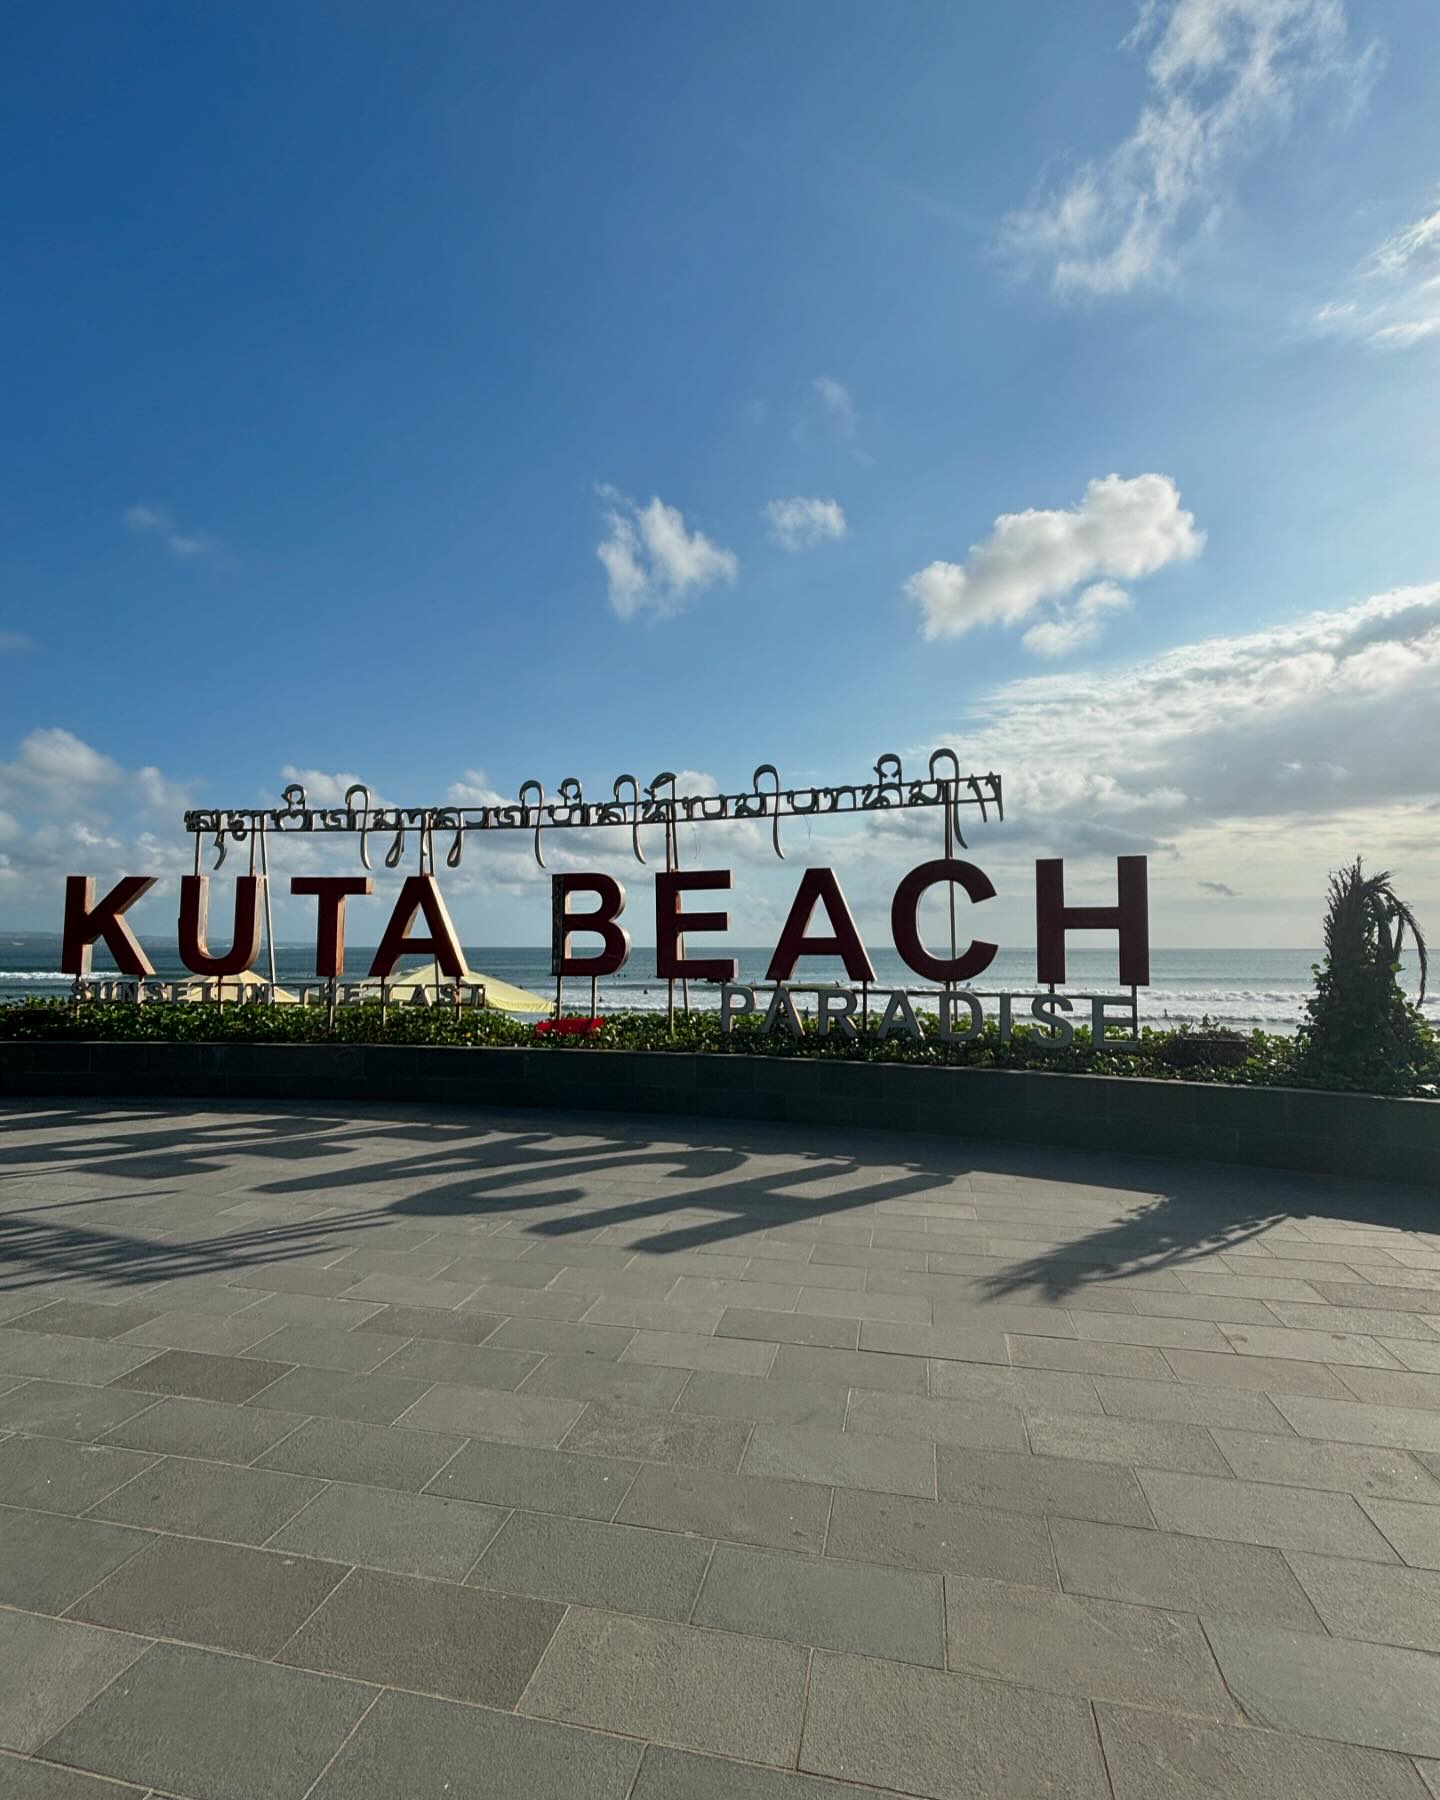 Kuta Beach in Bali! ☀️ Golden sands stretch out forever, and the waves are crashing in rhythm. Red flags today, but some surfers are out there catching some waves. Beach looks clean, sand is good and water looks good. 

#KutaBeachLife #BaliMagic #BeachDay #kuta #bali